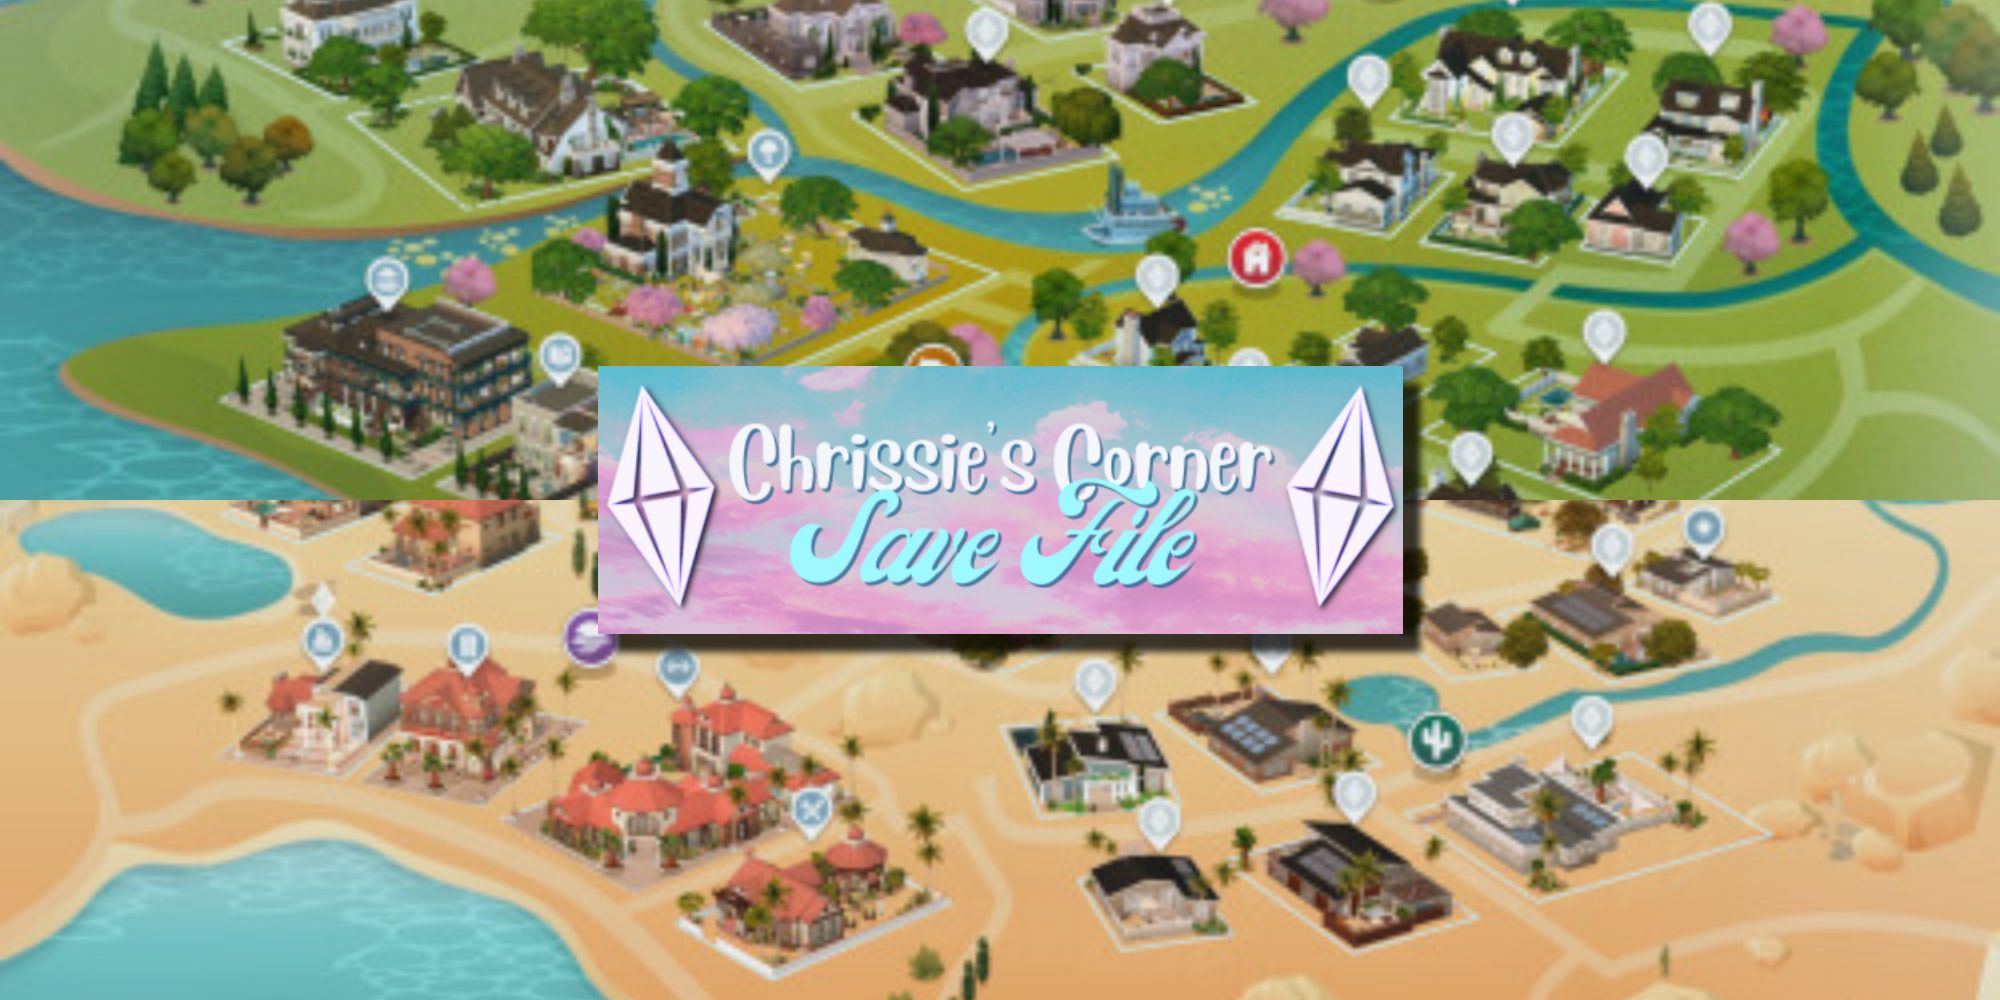 Willow Creek and Oasis Springs in the Chrissie's Corner Save File 1.0 by ChrissieYT for The Sims 4